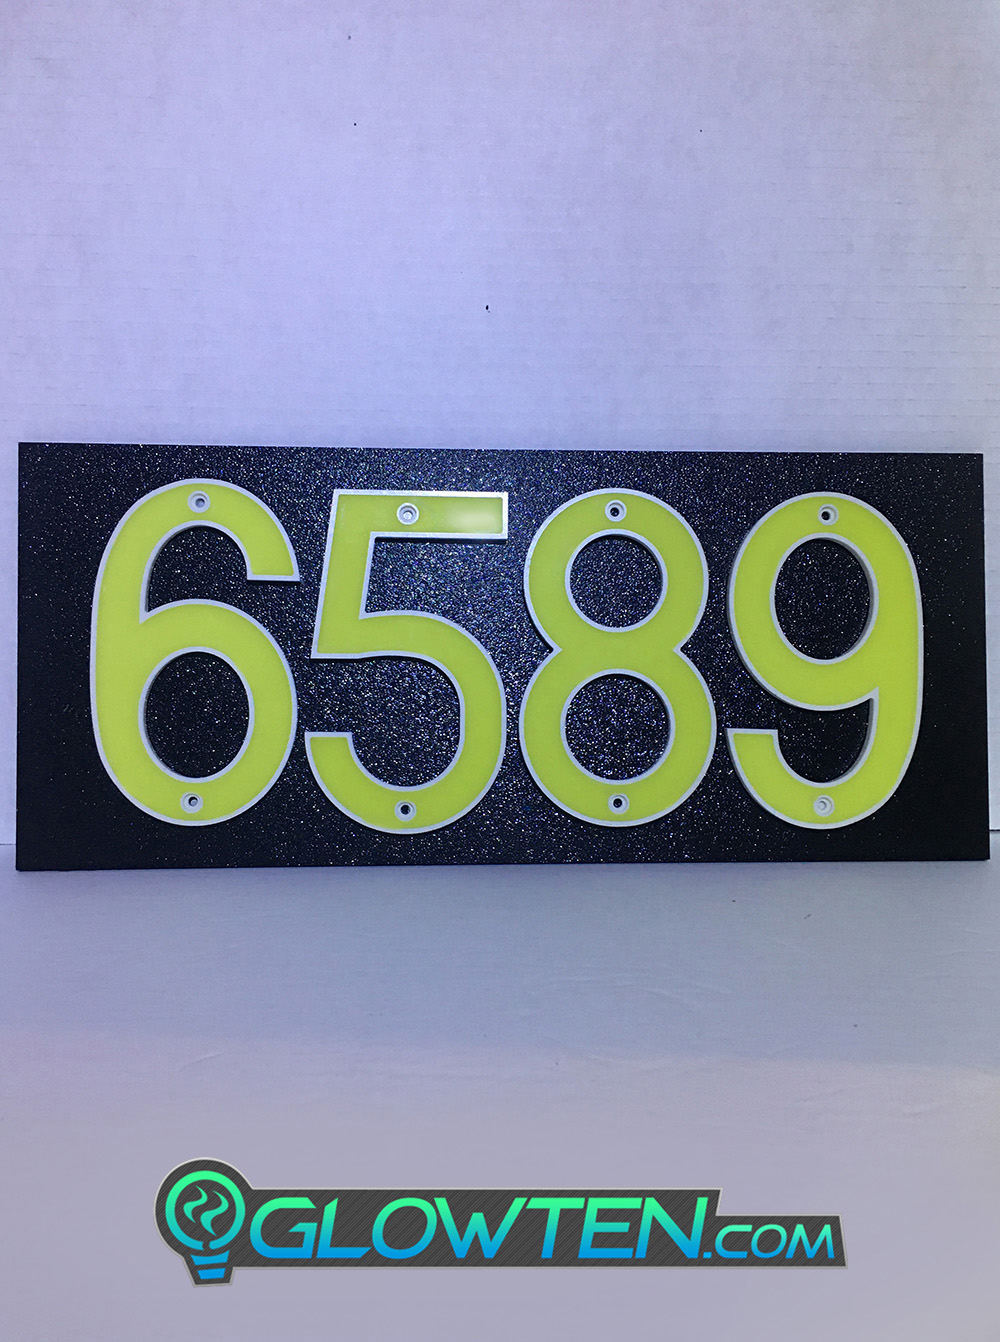 GLOWTEN.com - Fully Customizable Please Pick And Choose Your Numbers Emitting Green Glow Help Your Delivery Guy At Night Four 4 Numbers With Black Plaque Backing Glow In Dark House Address Number Horizontal Eco Friendly Photoluminescent Sign Abs Material Price For Whole Set Backboard Included Day View Photo Luminescent Vinyl No Electricity Required Emitting Glow Light Naturally picture photo cap preview pic image search 1